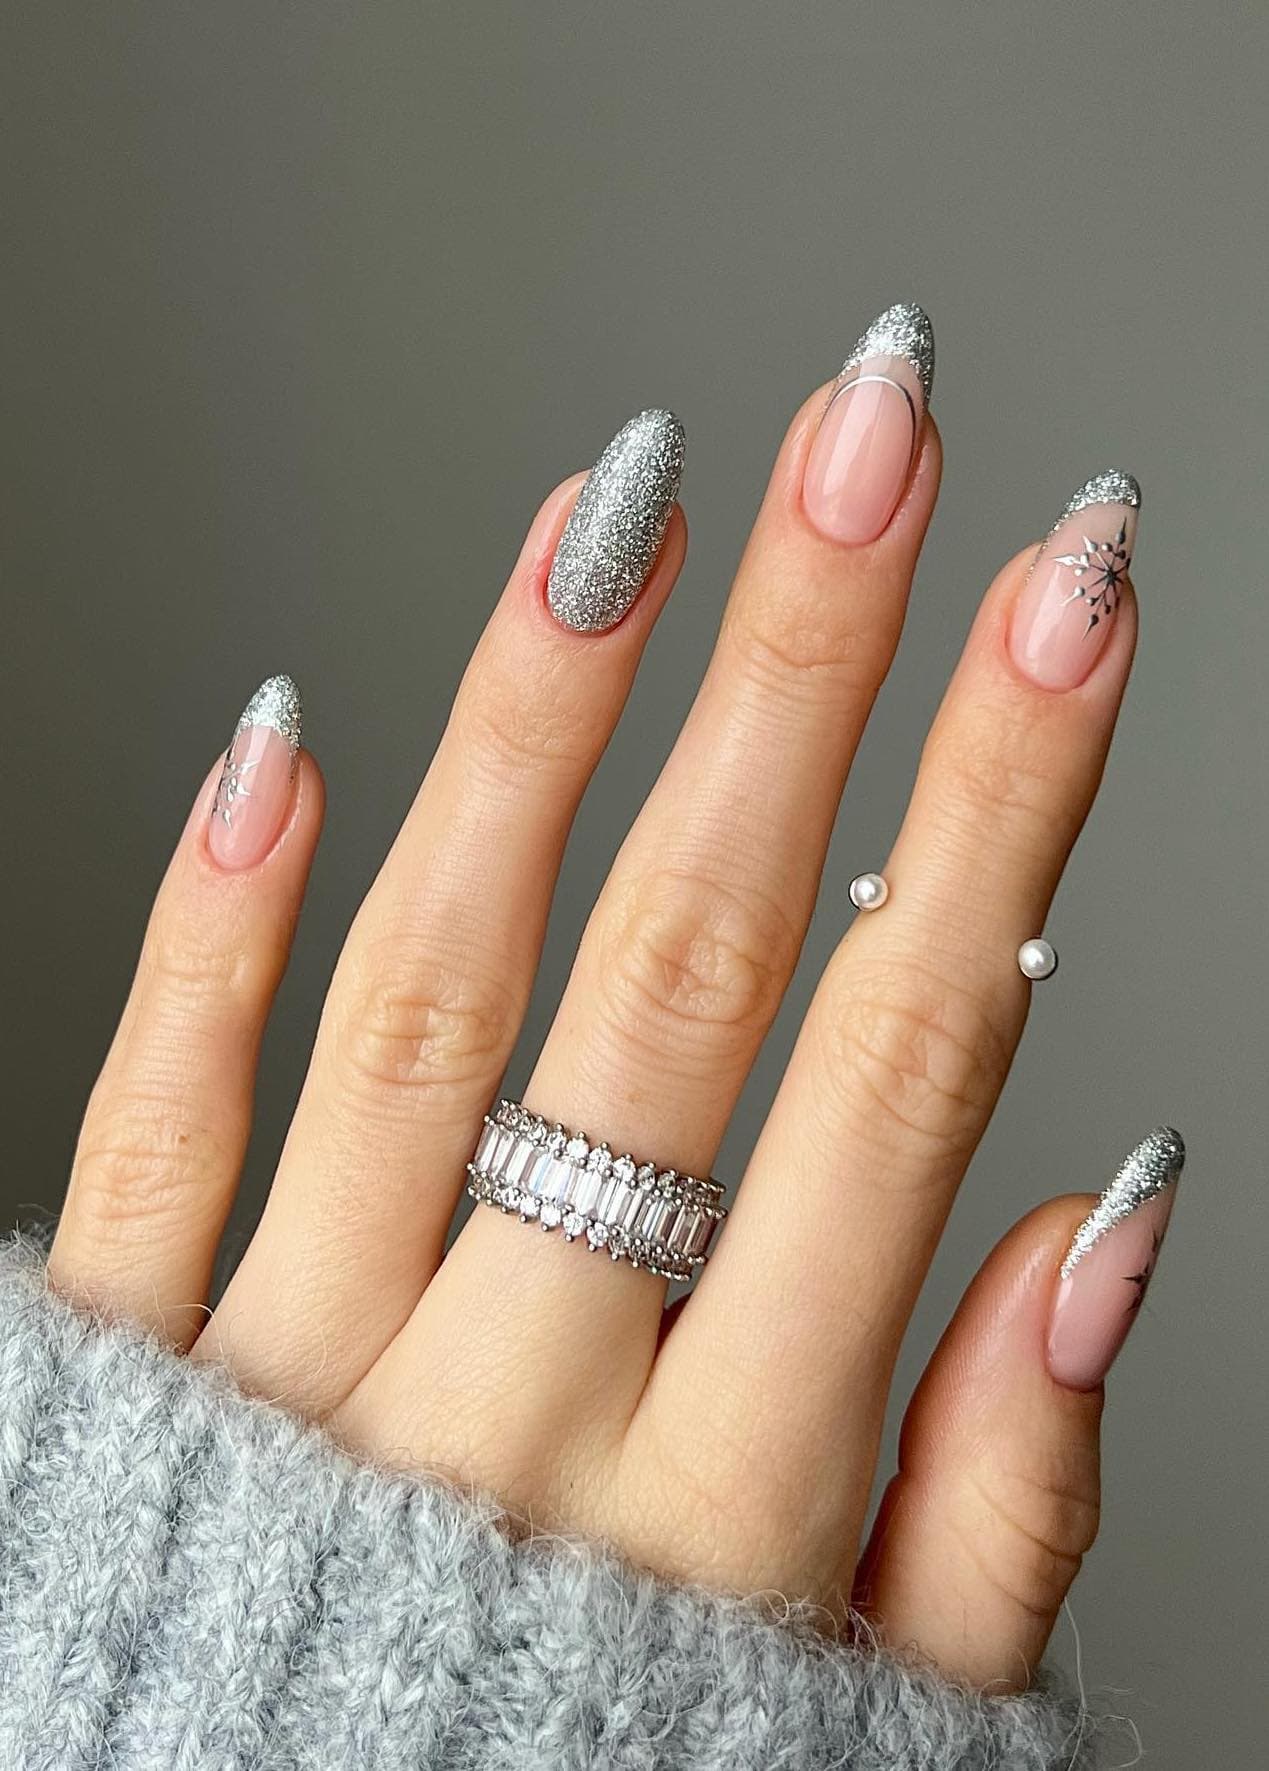 A hand with medium nude almond nails painted with silver glitter French tips with a full silver glitter accent nail and silver snowflake accents